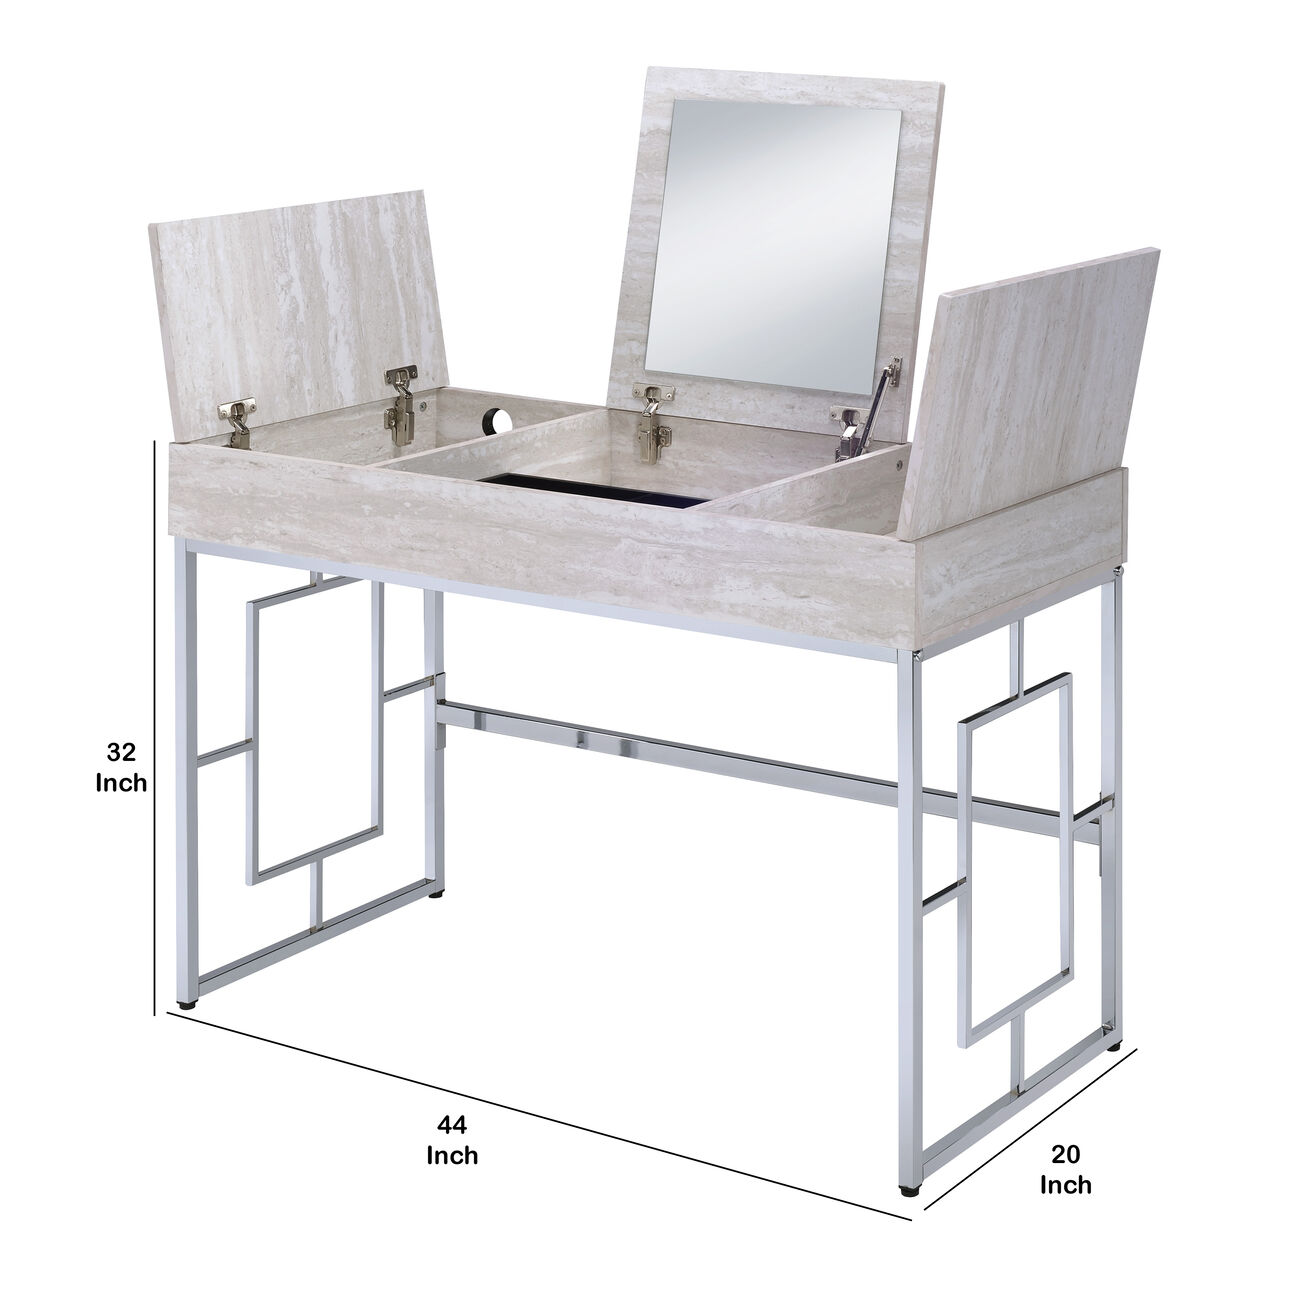 Wood and Metal Vanity Desk with Lift Top Compartments,Silver and Brown